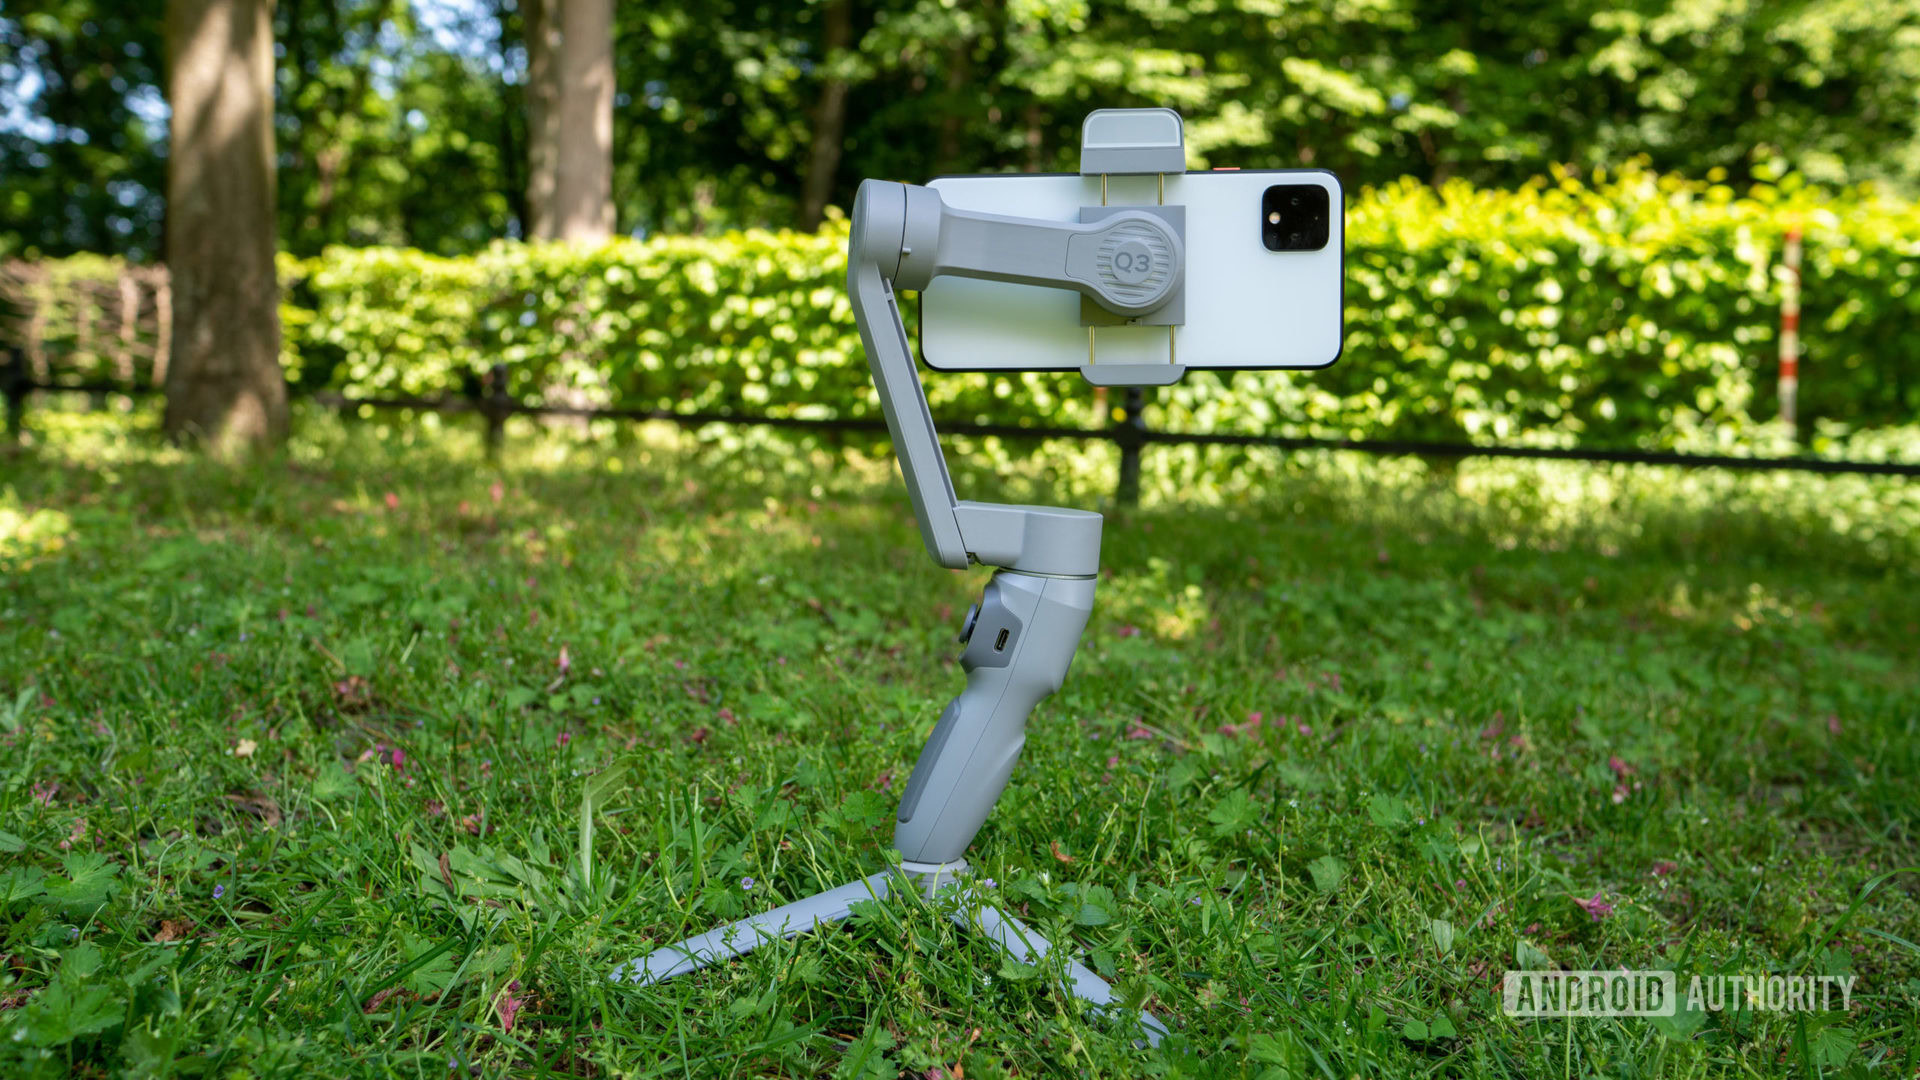 DJI Osmo Mobile 3 review: A terrific smartphone gimbal - Android Authority